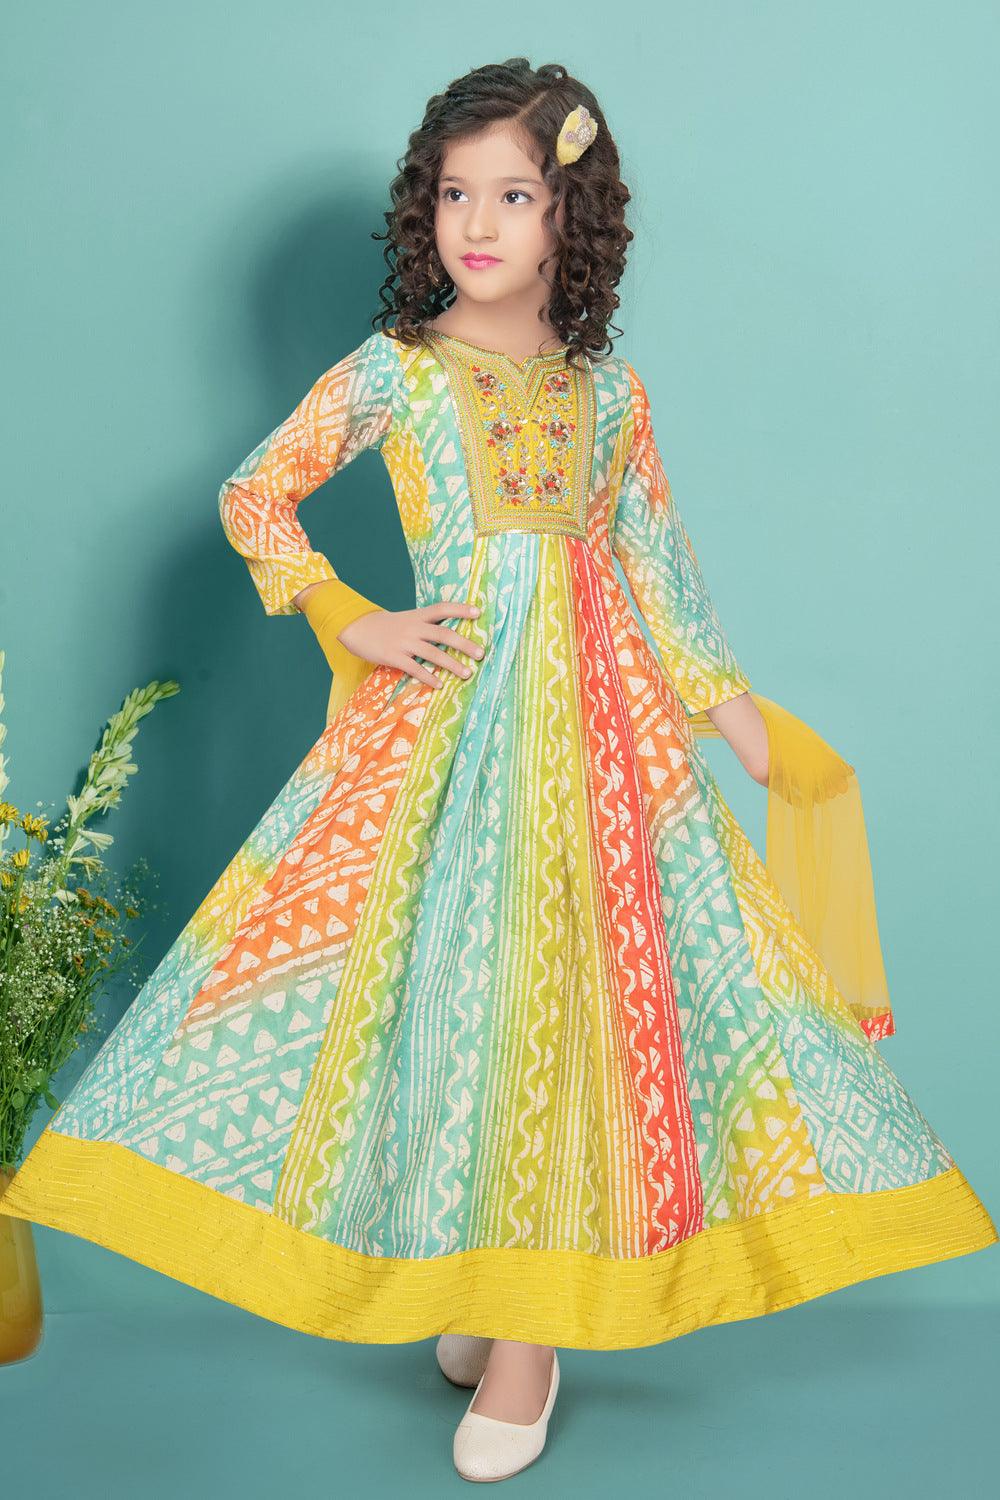 Multicolor Digital Print, Zardozi, Sequins, Pearl and Thread work Long Party Gown for Girls - Seasons Chennai